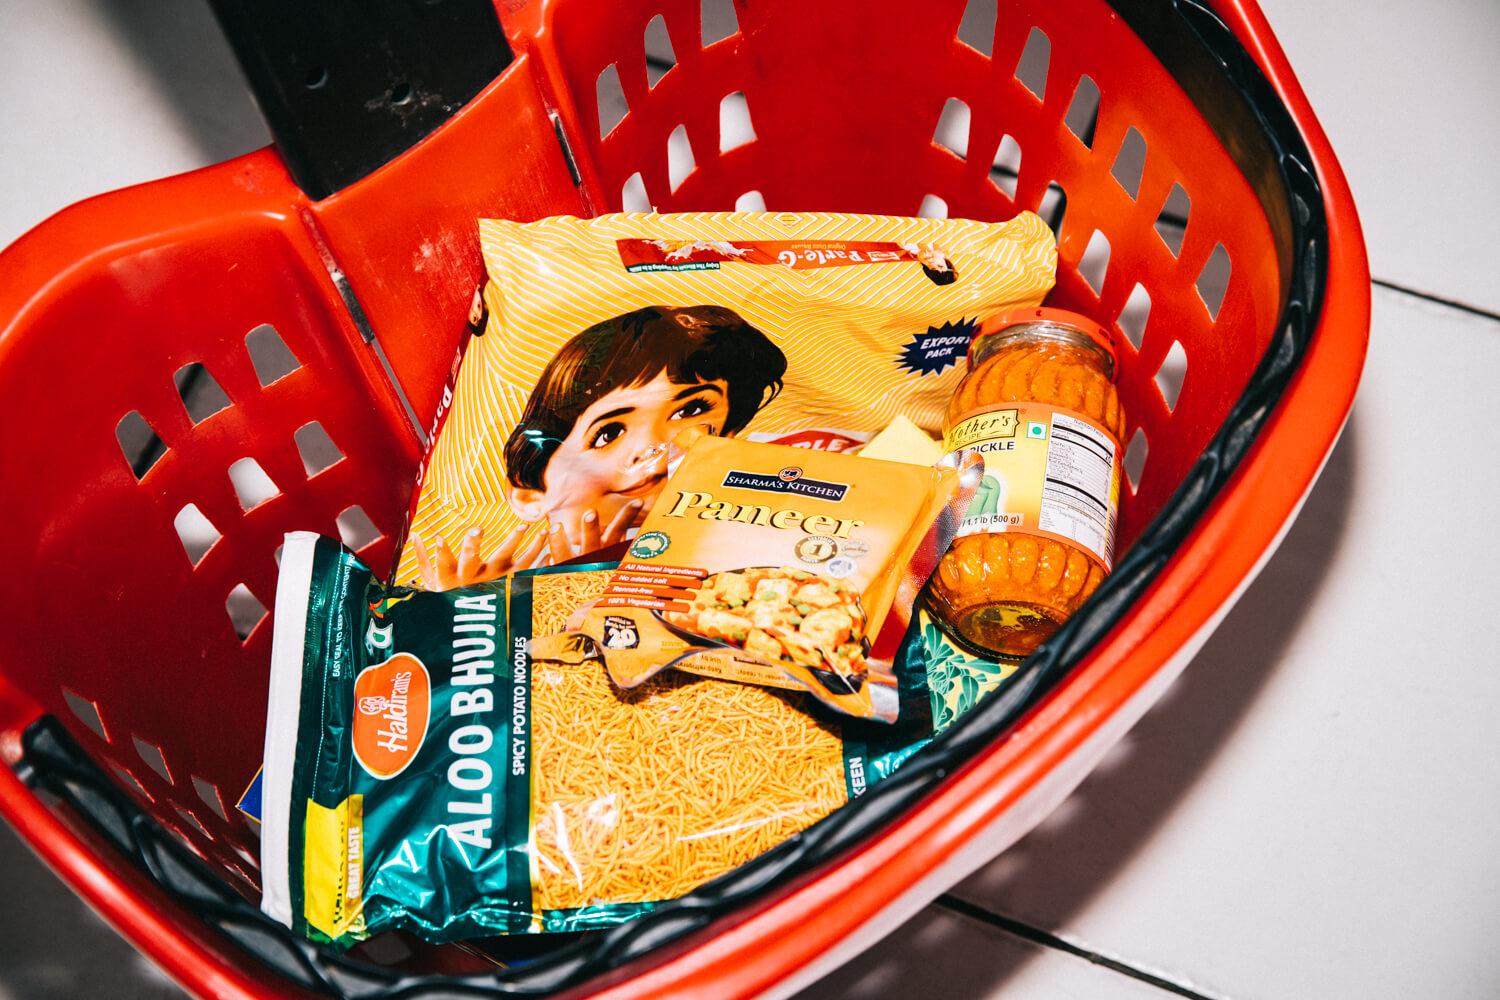 Go-to Indian groceries and snacks